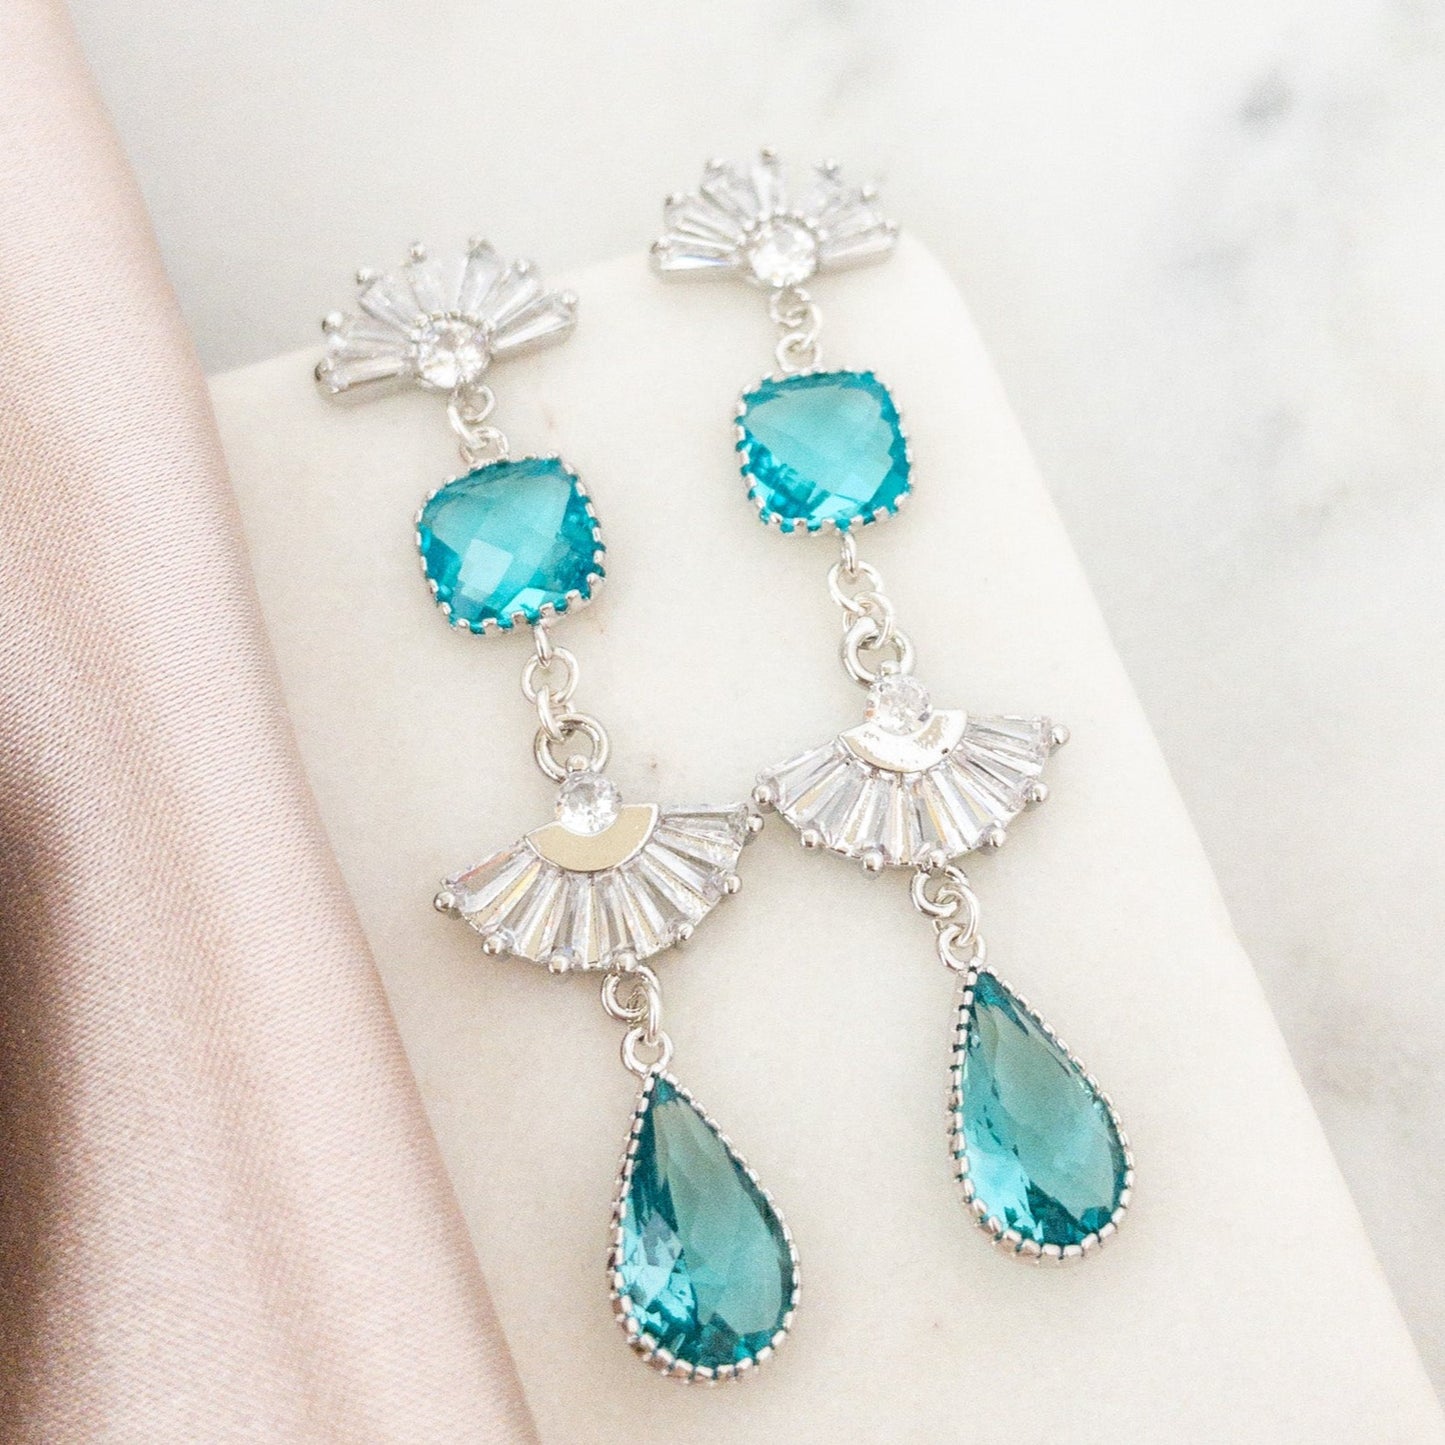 The Evelyn Earrings - Silver/Teal Stones